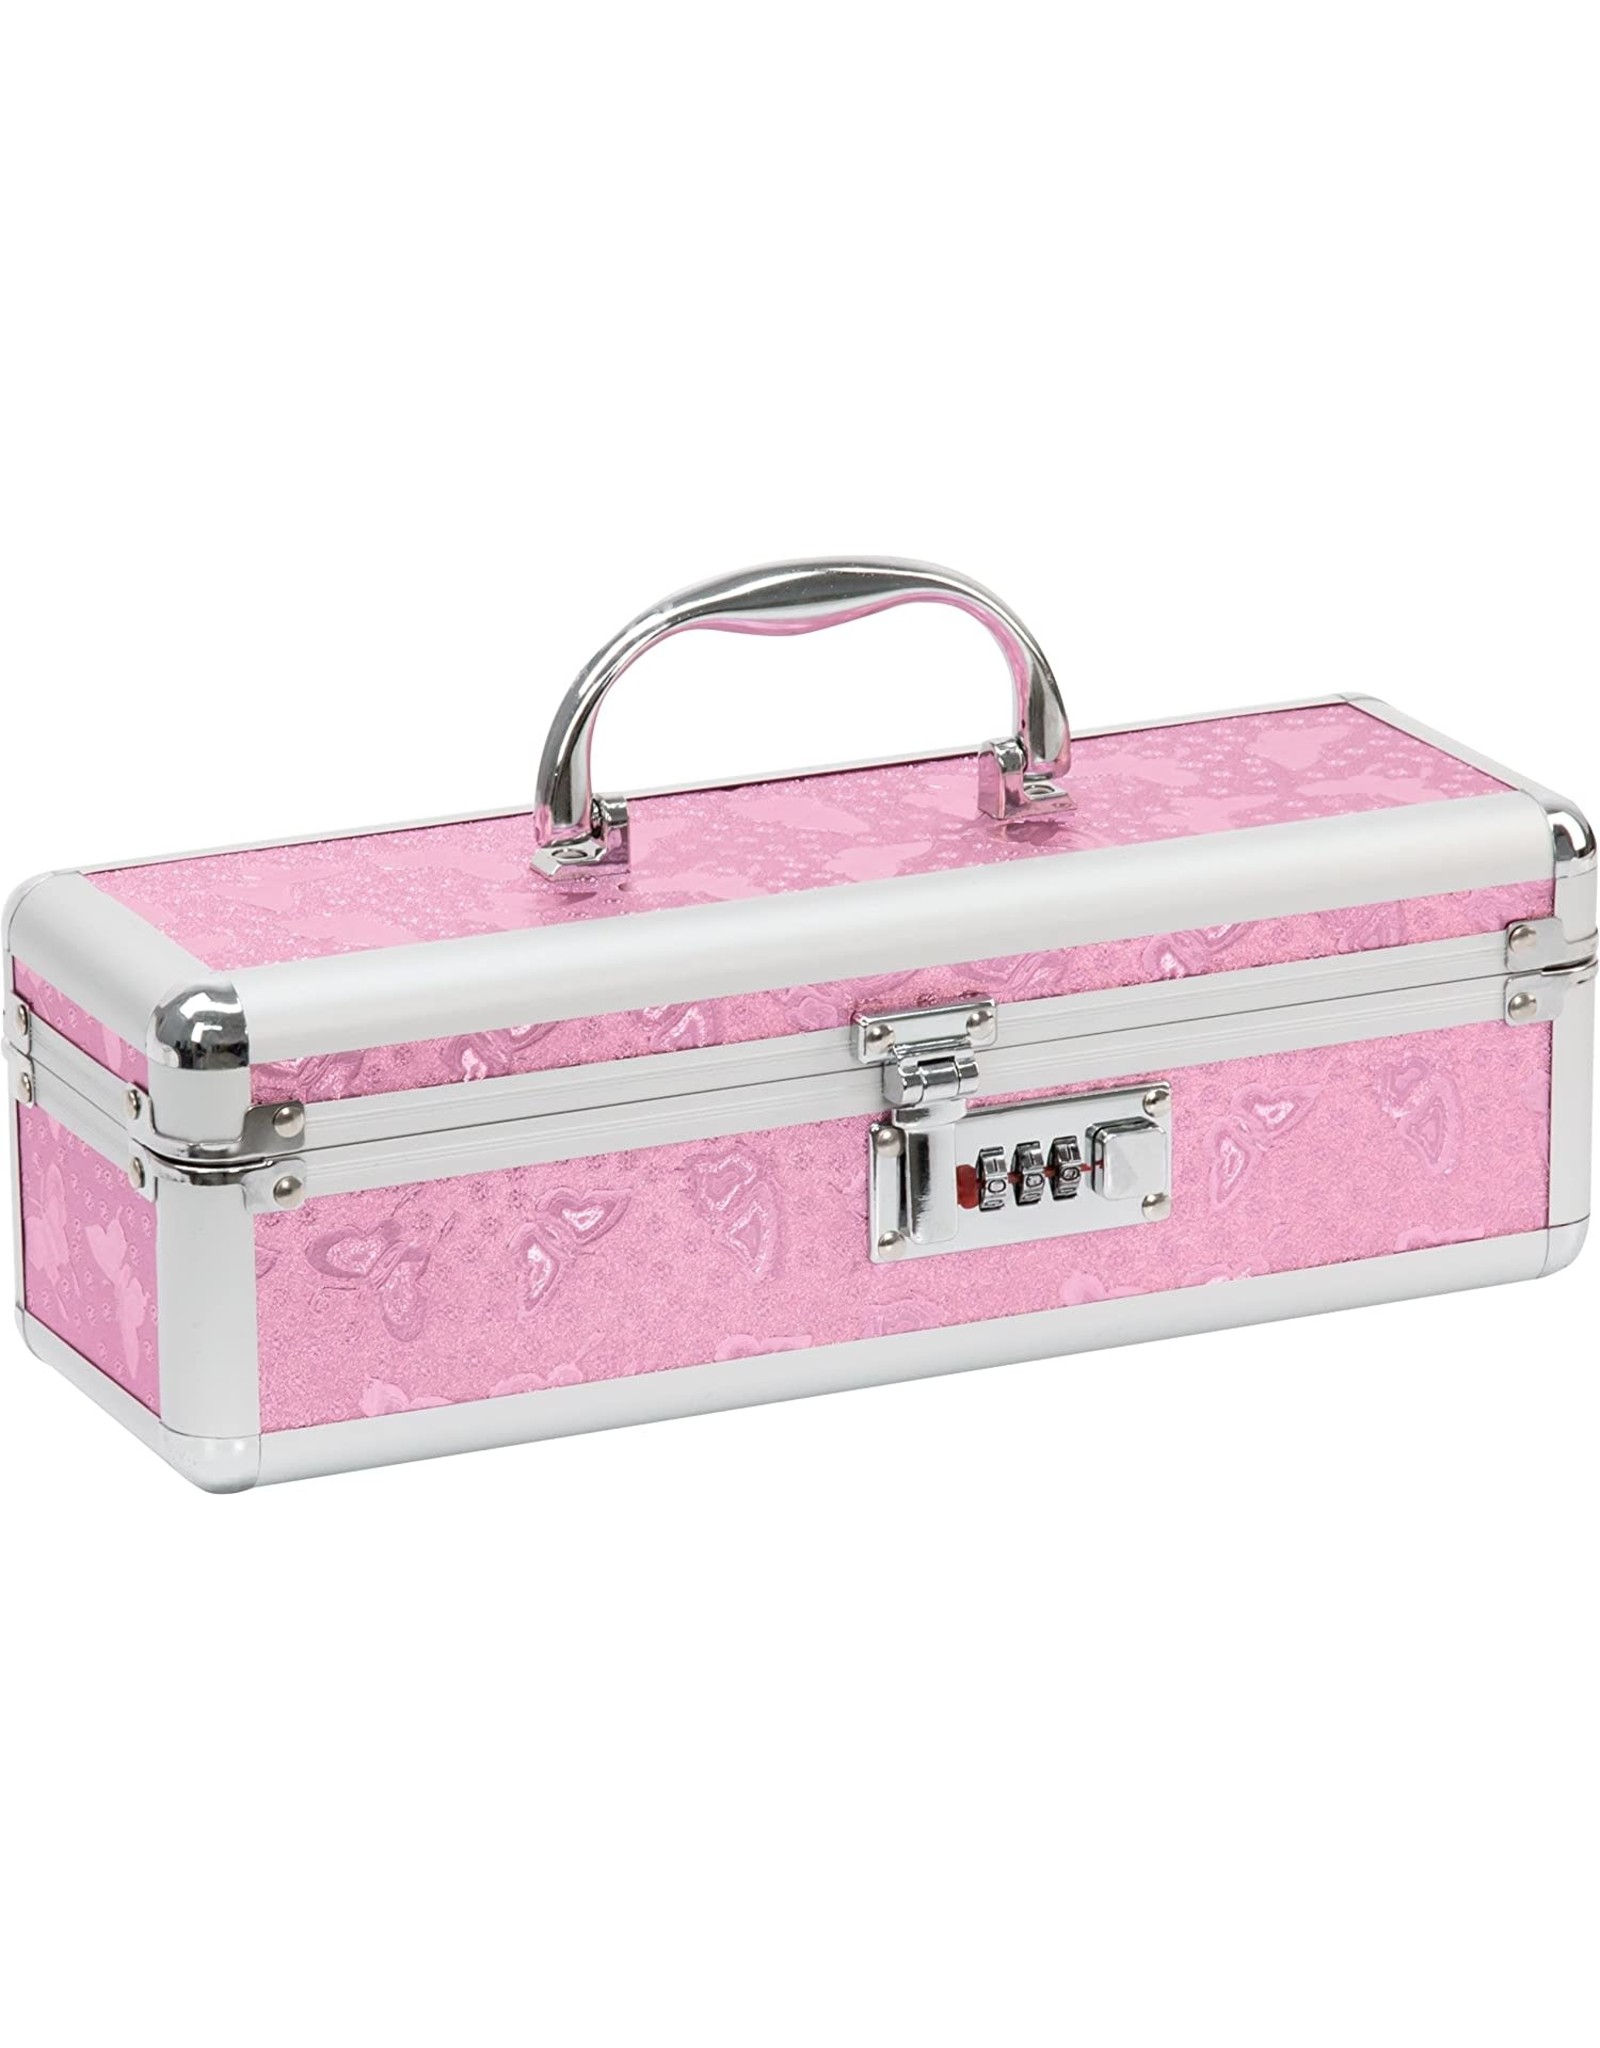 LOCKABLE VIBRATOR TOY CHEST - PINK